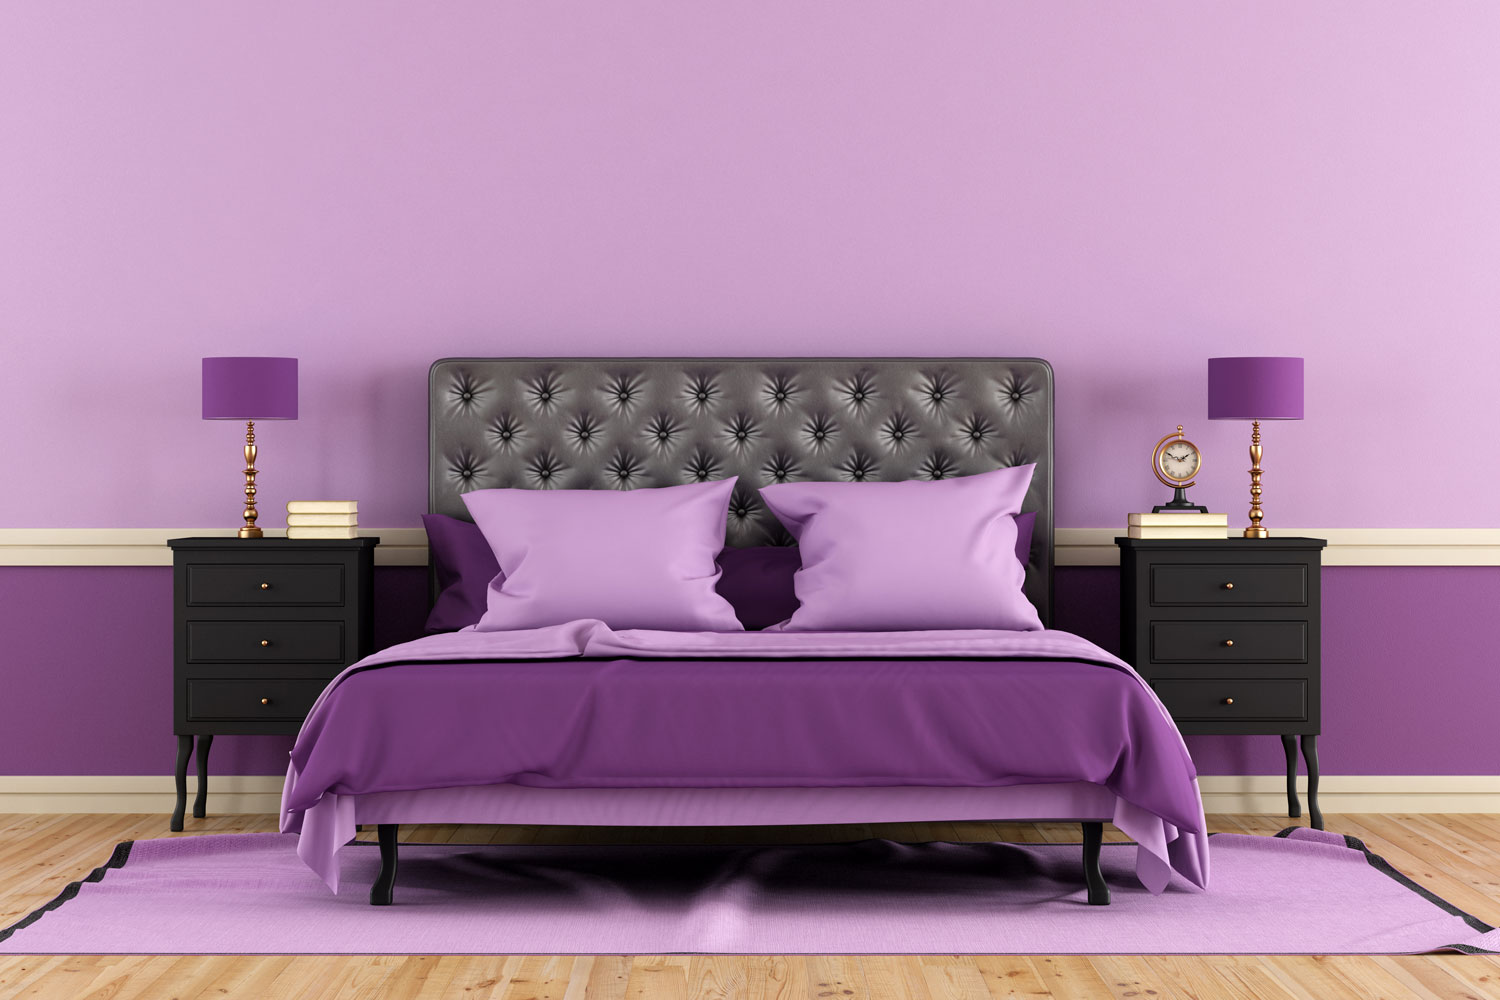 Lavender and purple colored bedroom with purple bedding and a purple area rug